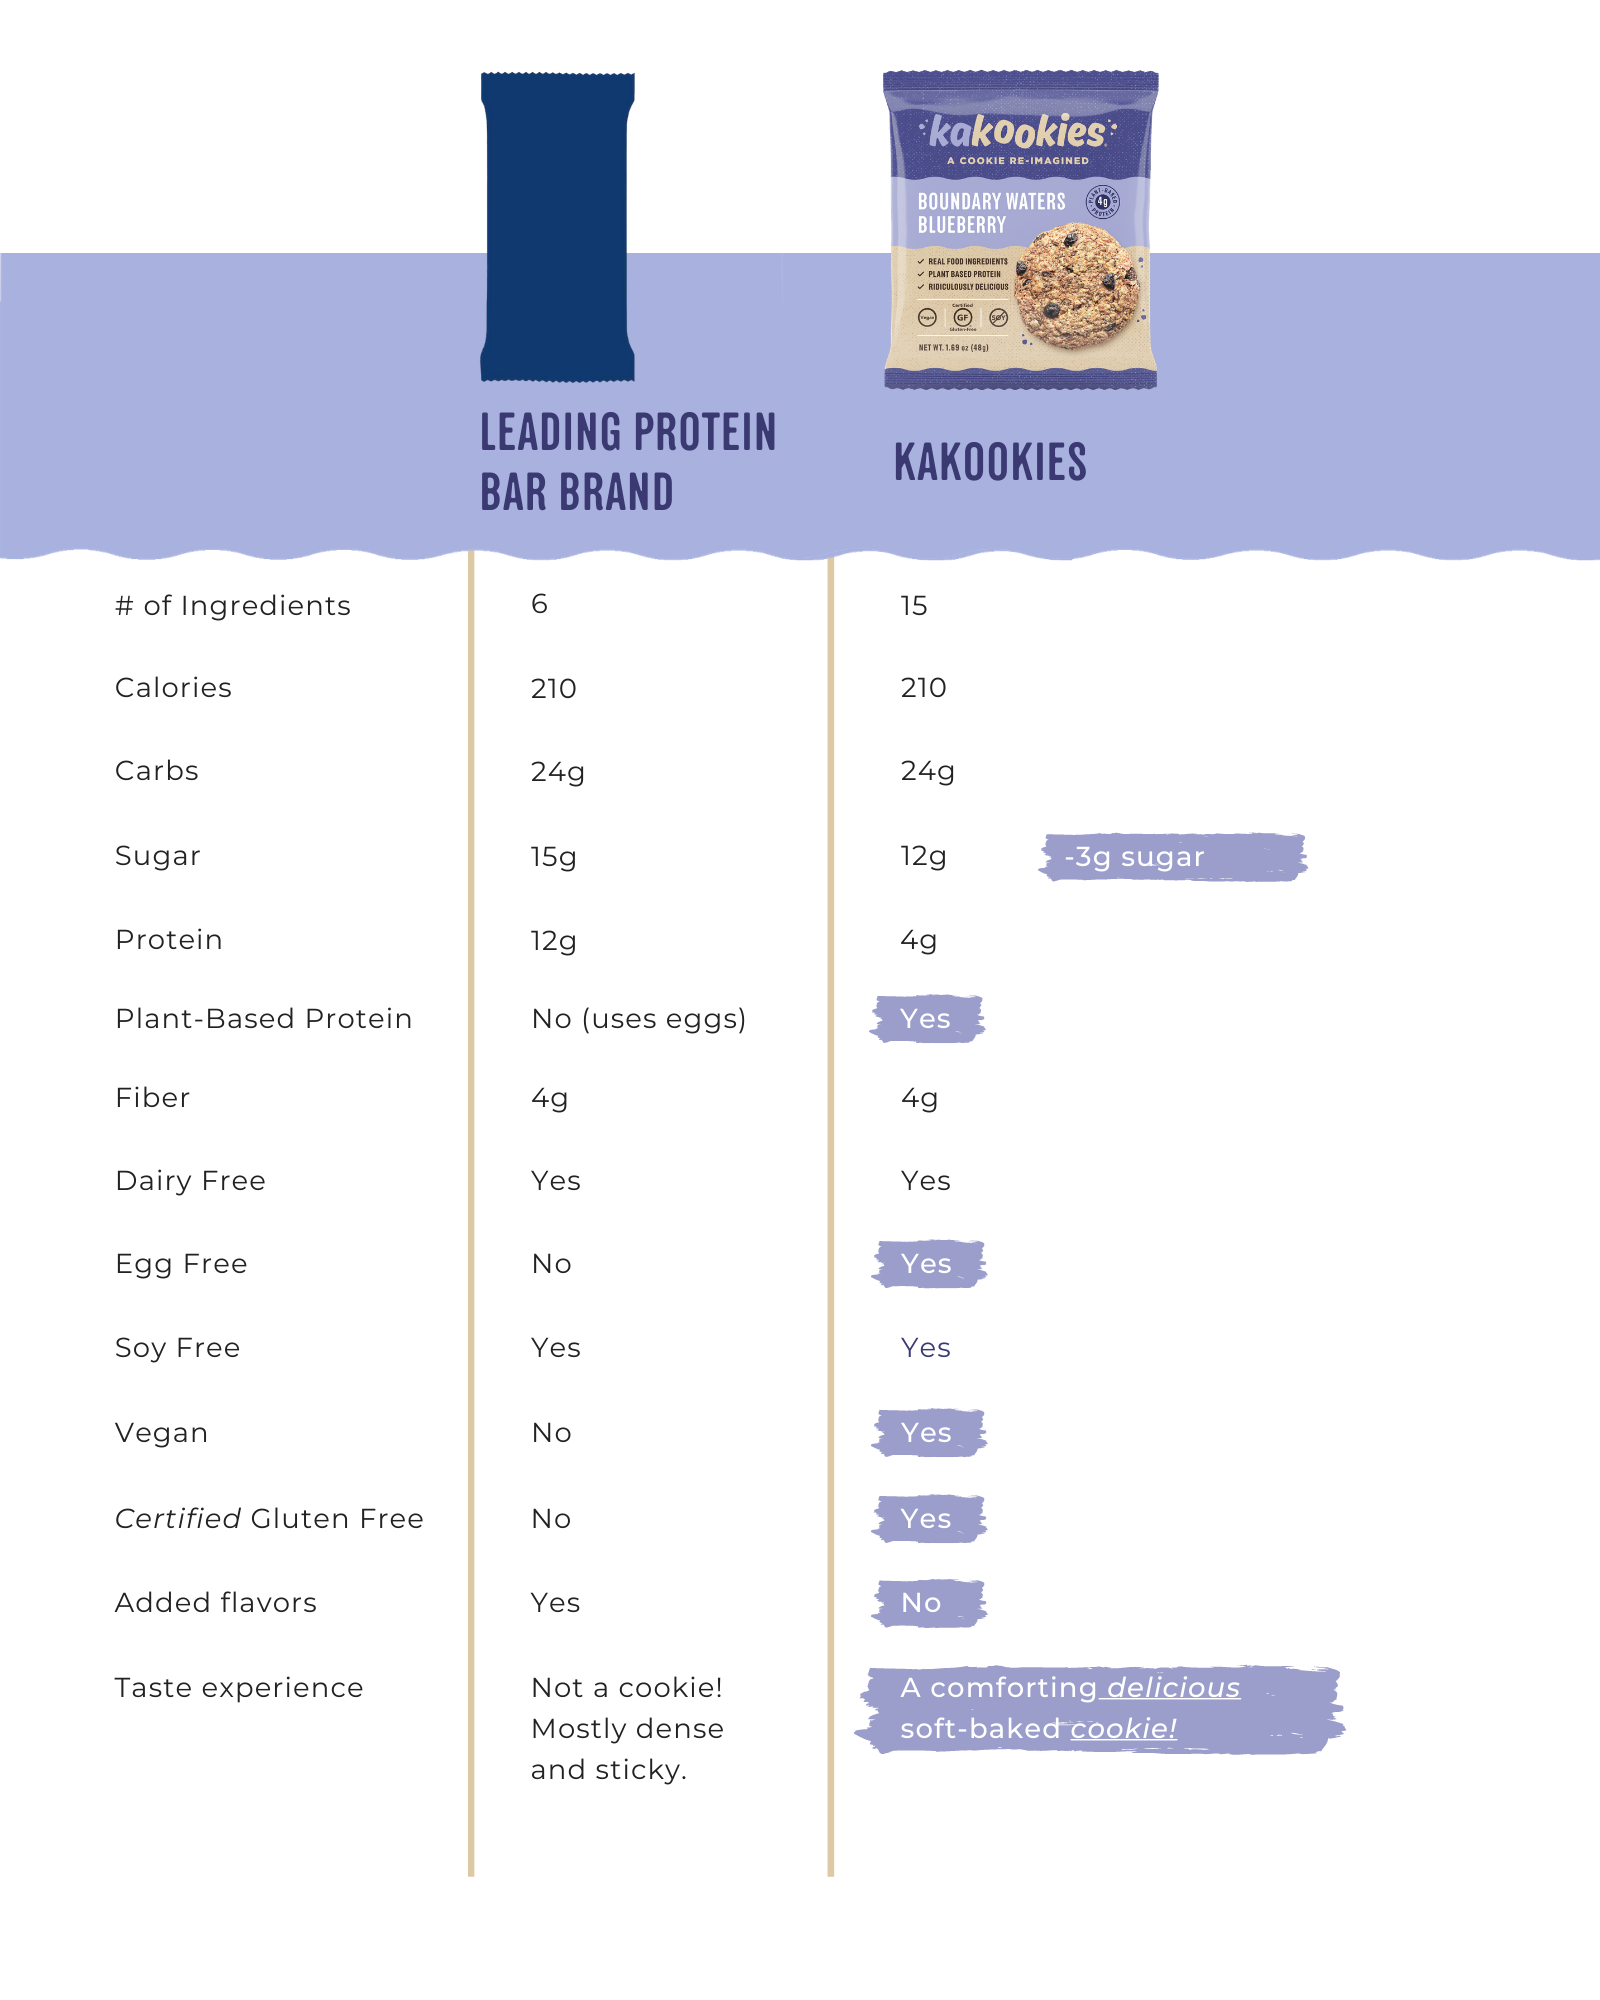 nutritional comparison to leading blueberry protein bar